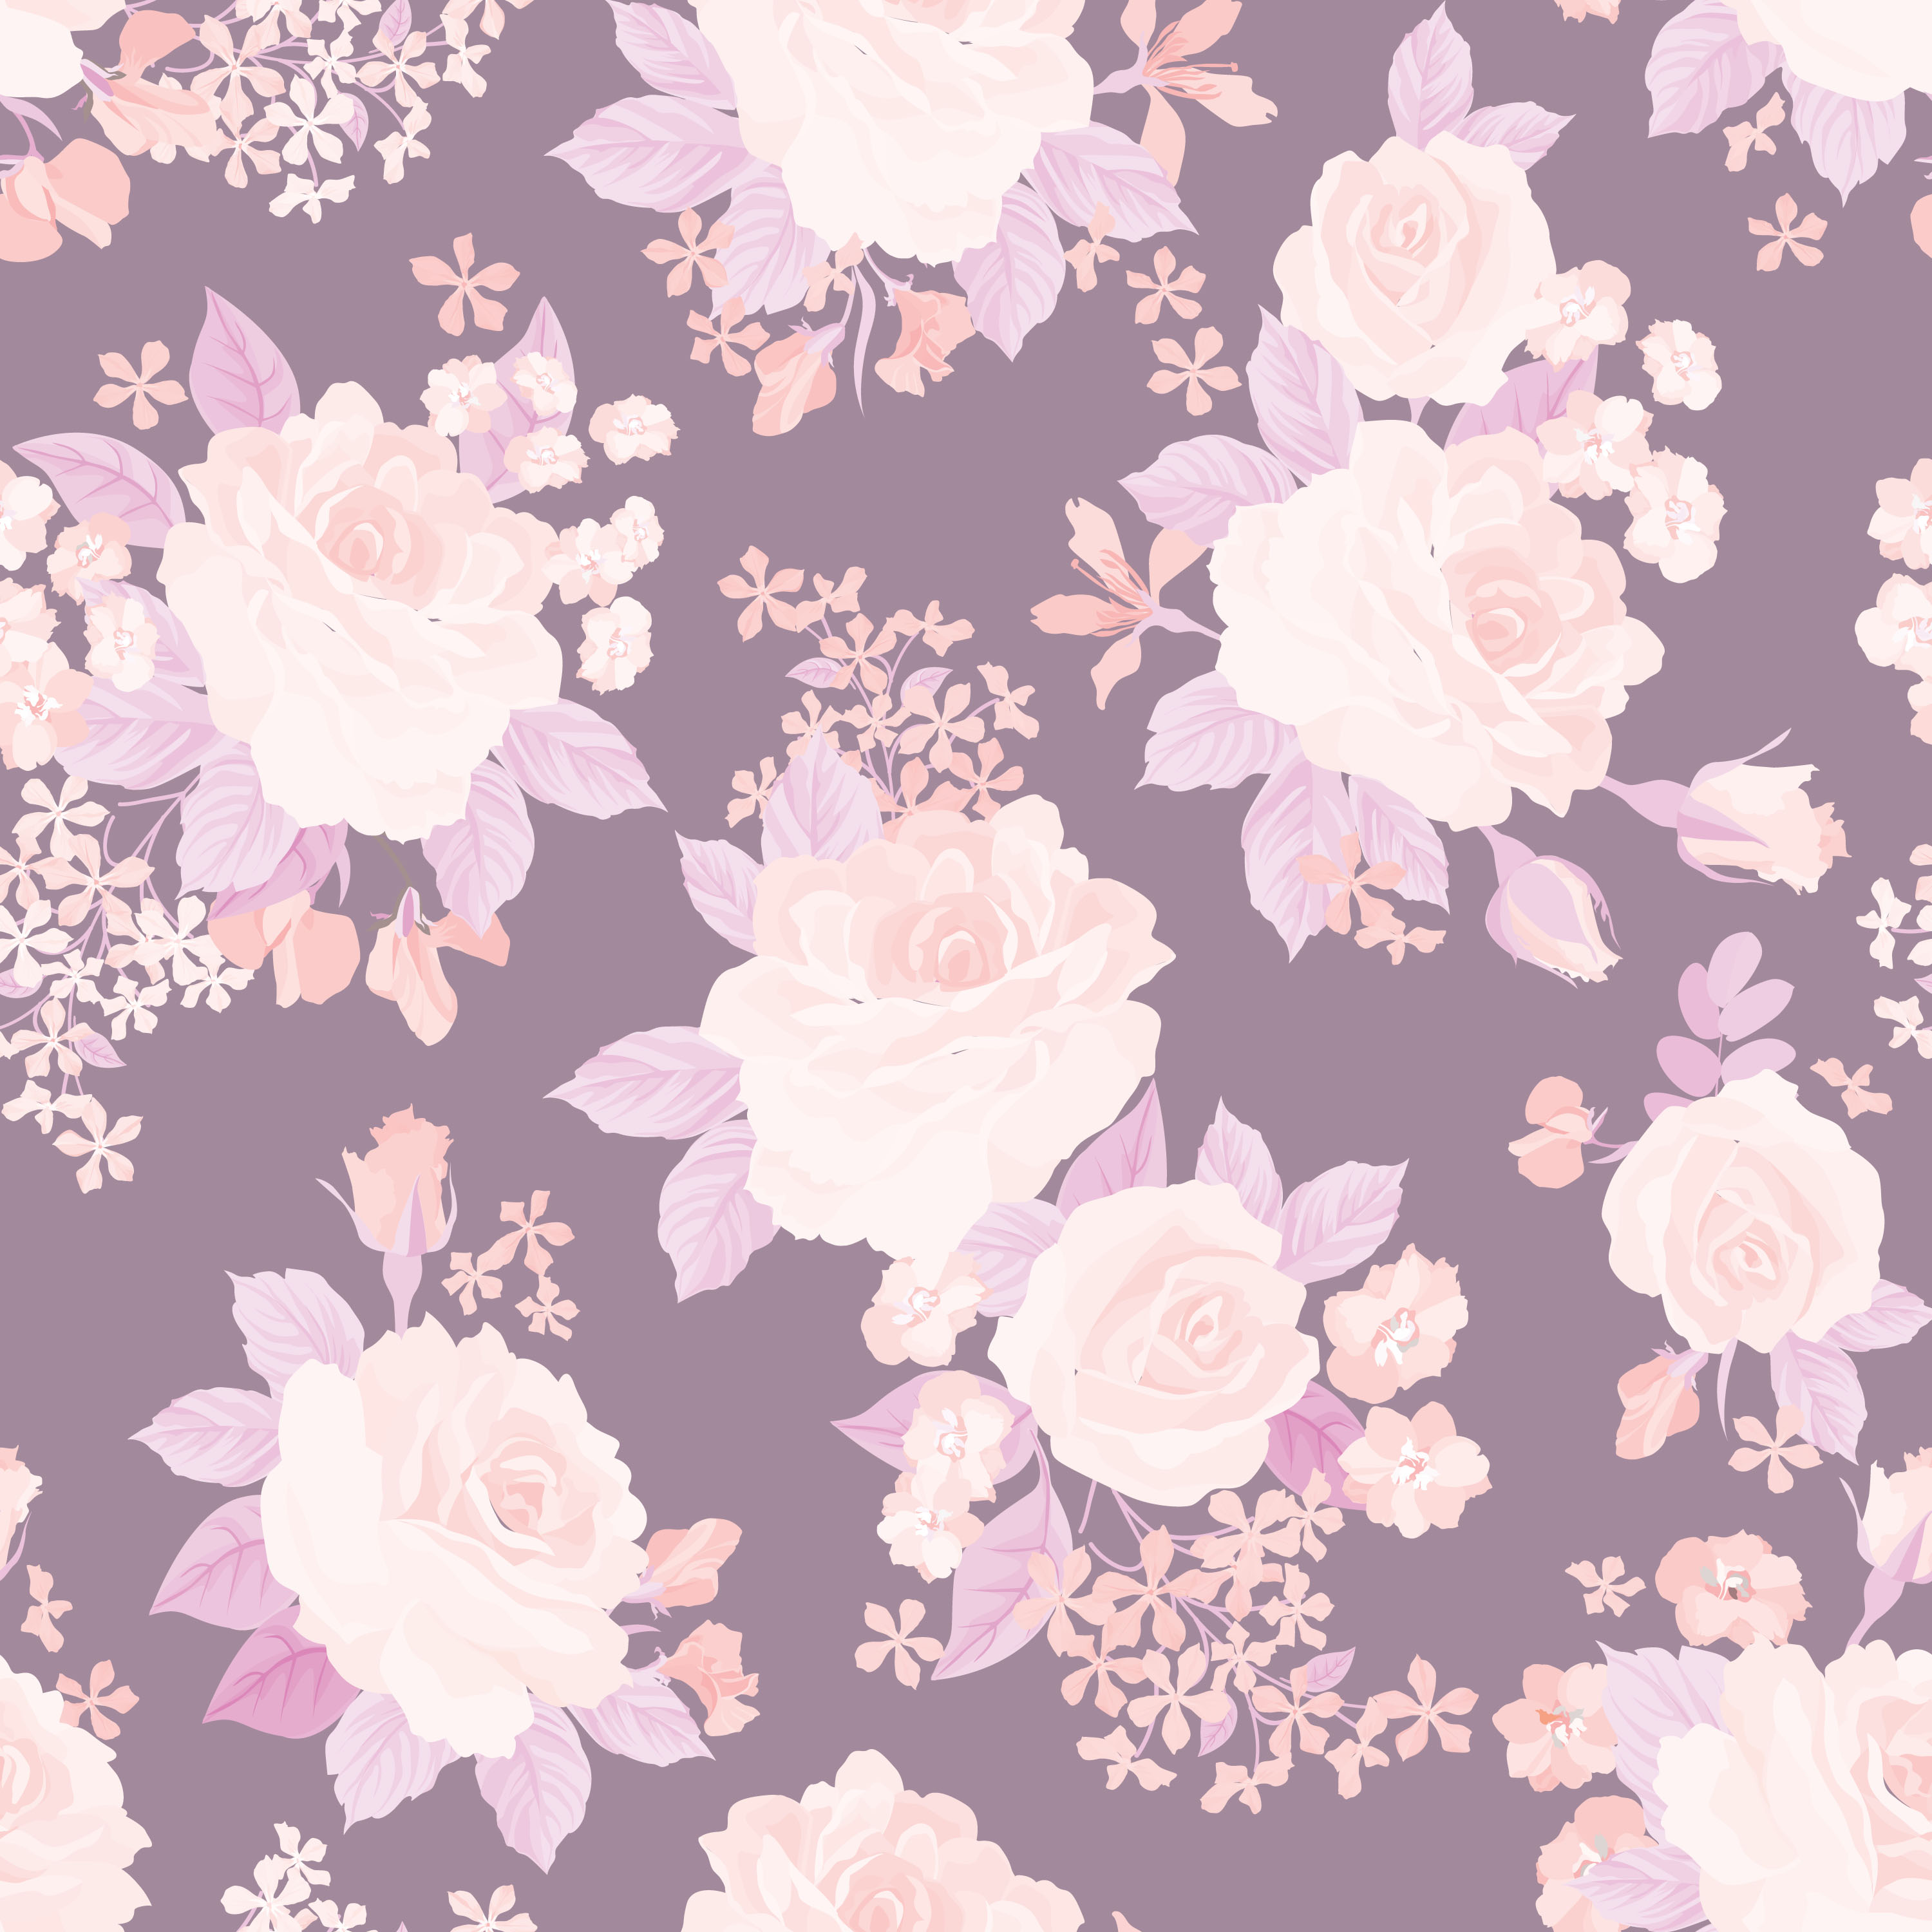 Download Floral seamless pattern. Flower background. Garden texture - Download Free Vectors, Clipart ...